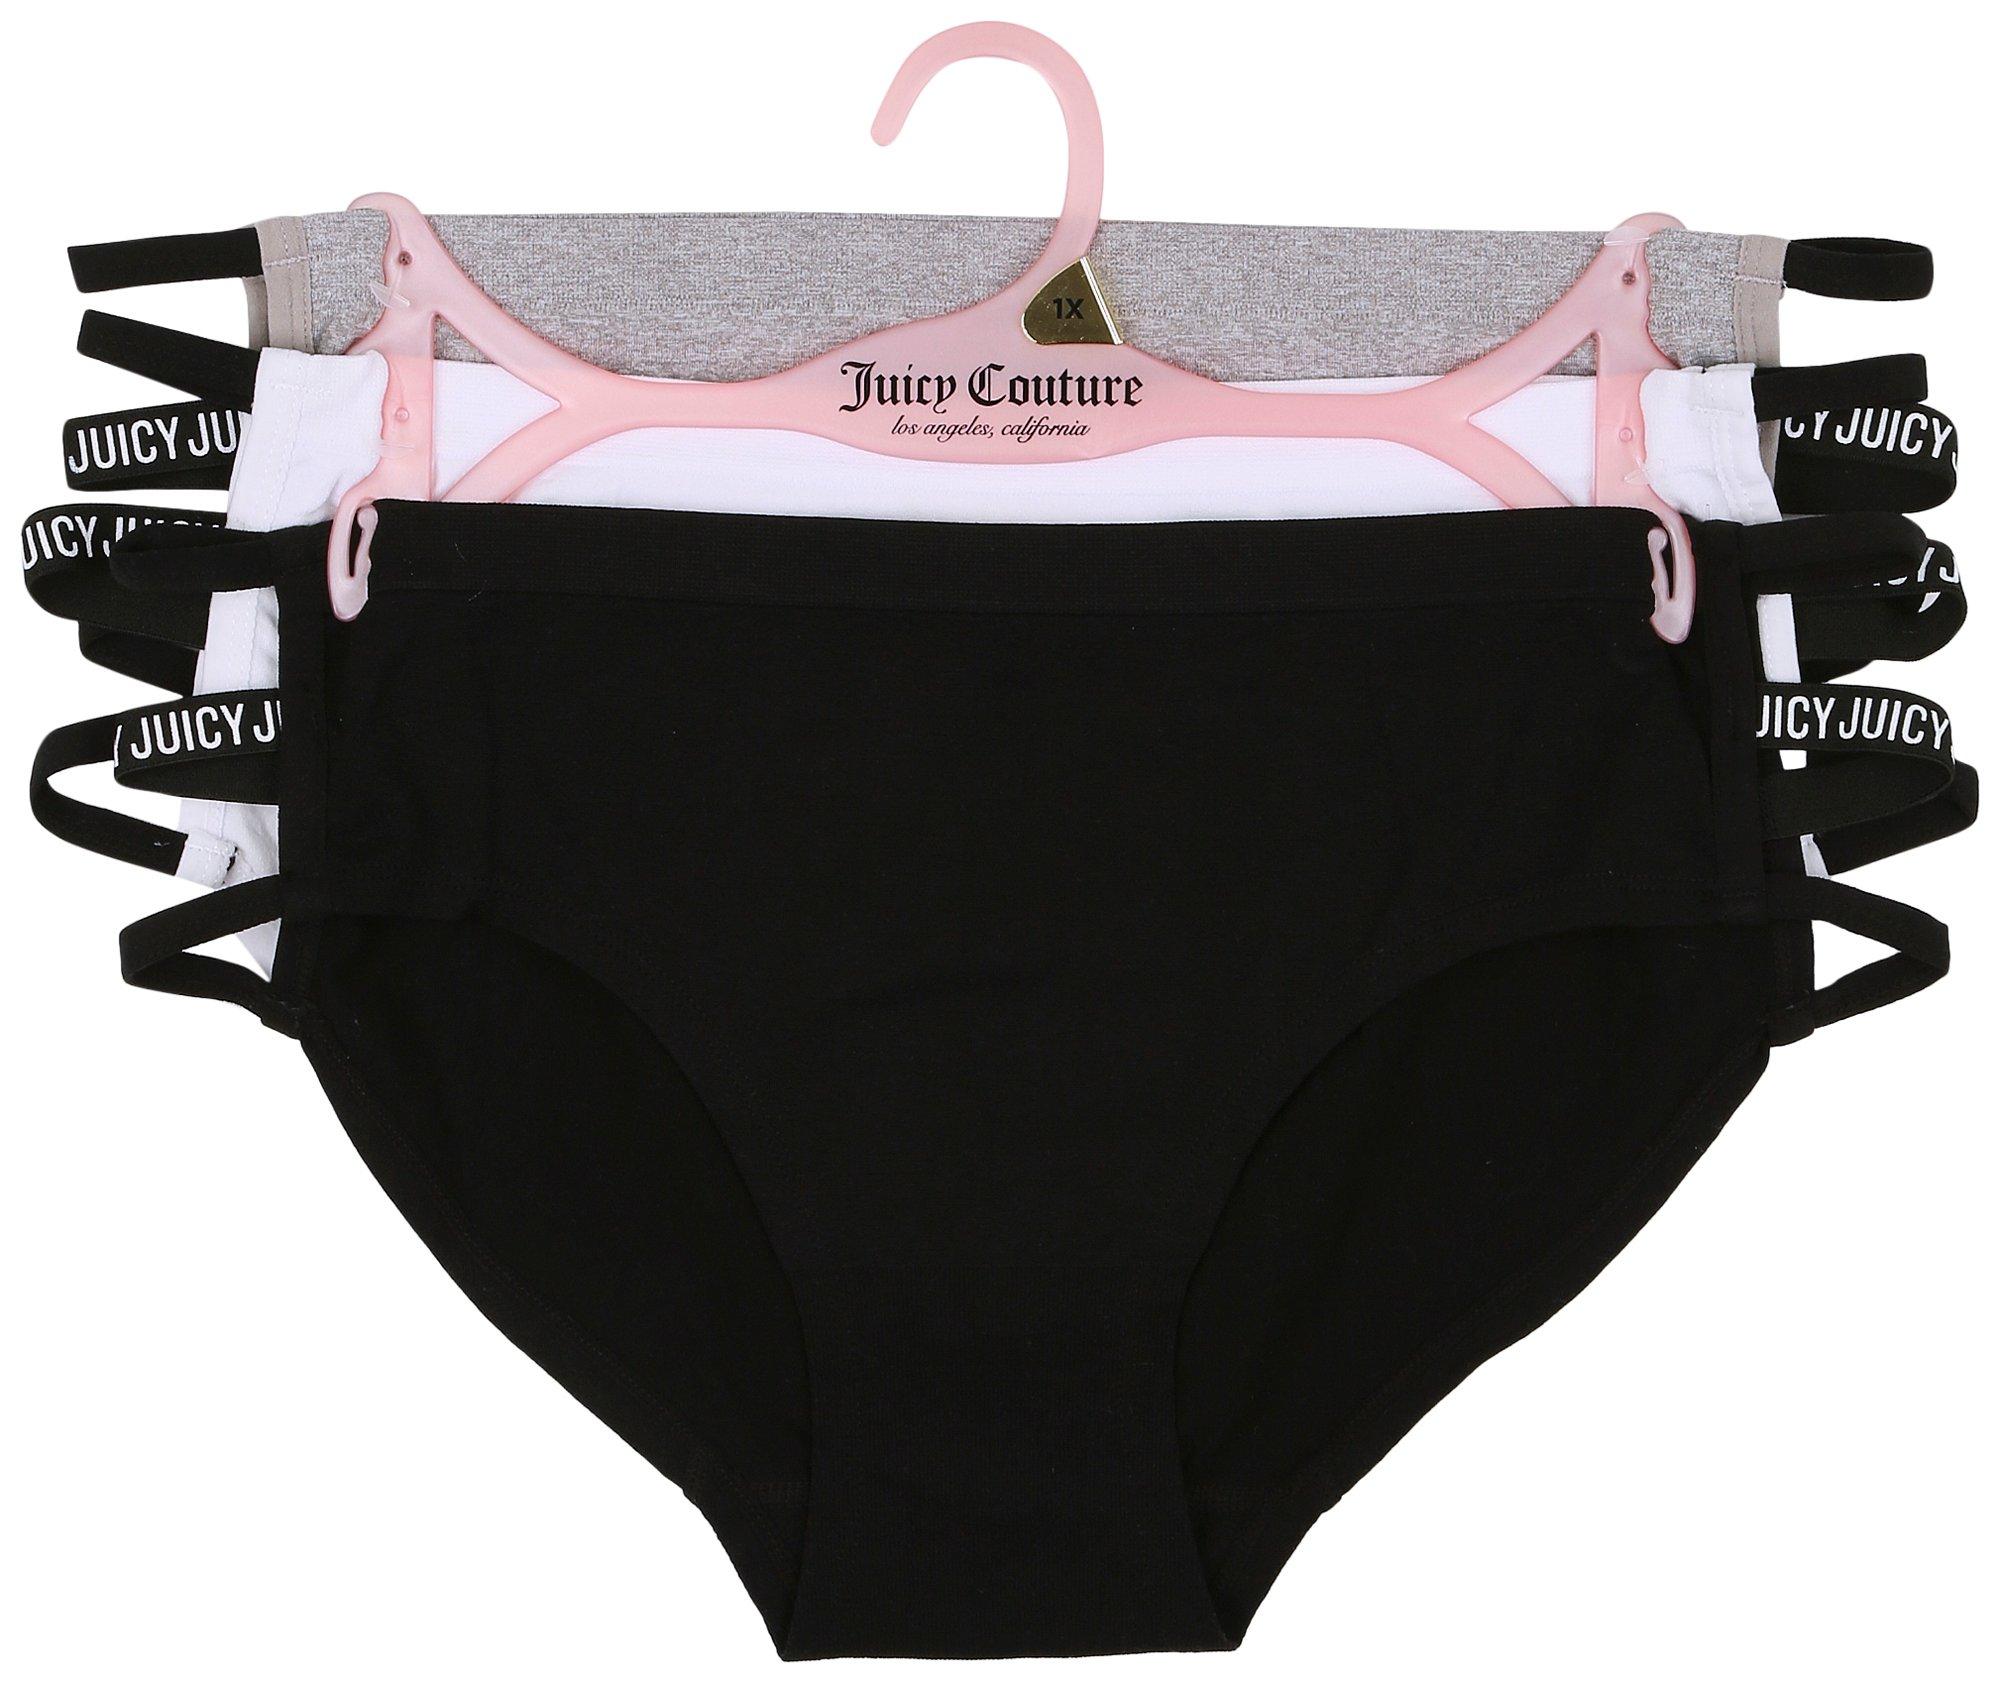 Juicy Couture ~ Womens Hipster Underwear Panties Polyester Blend 5